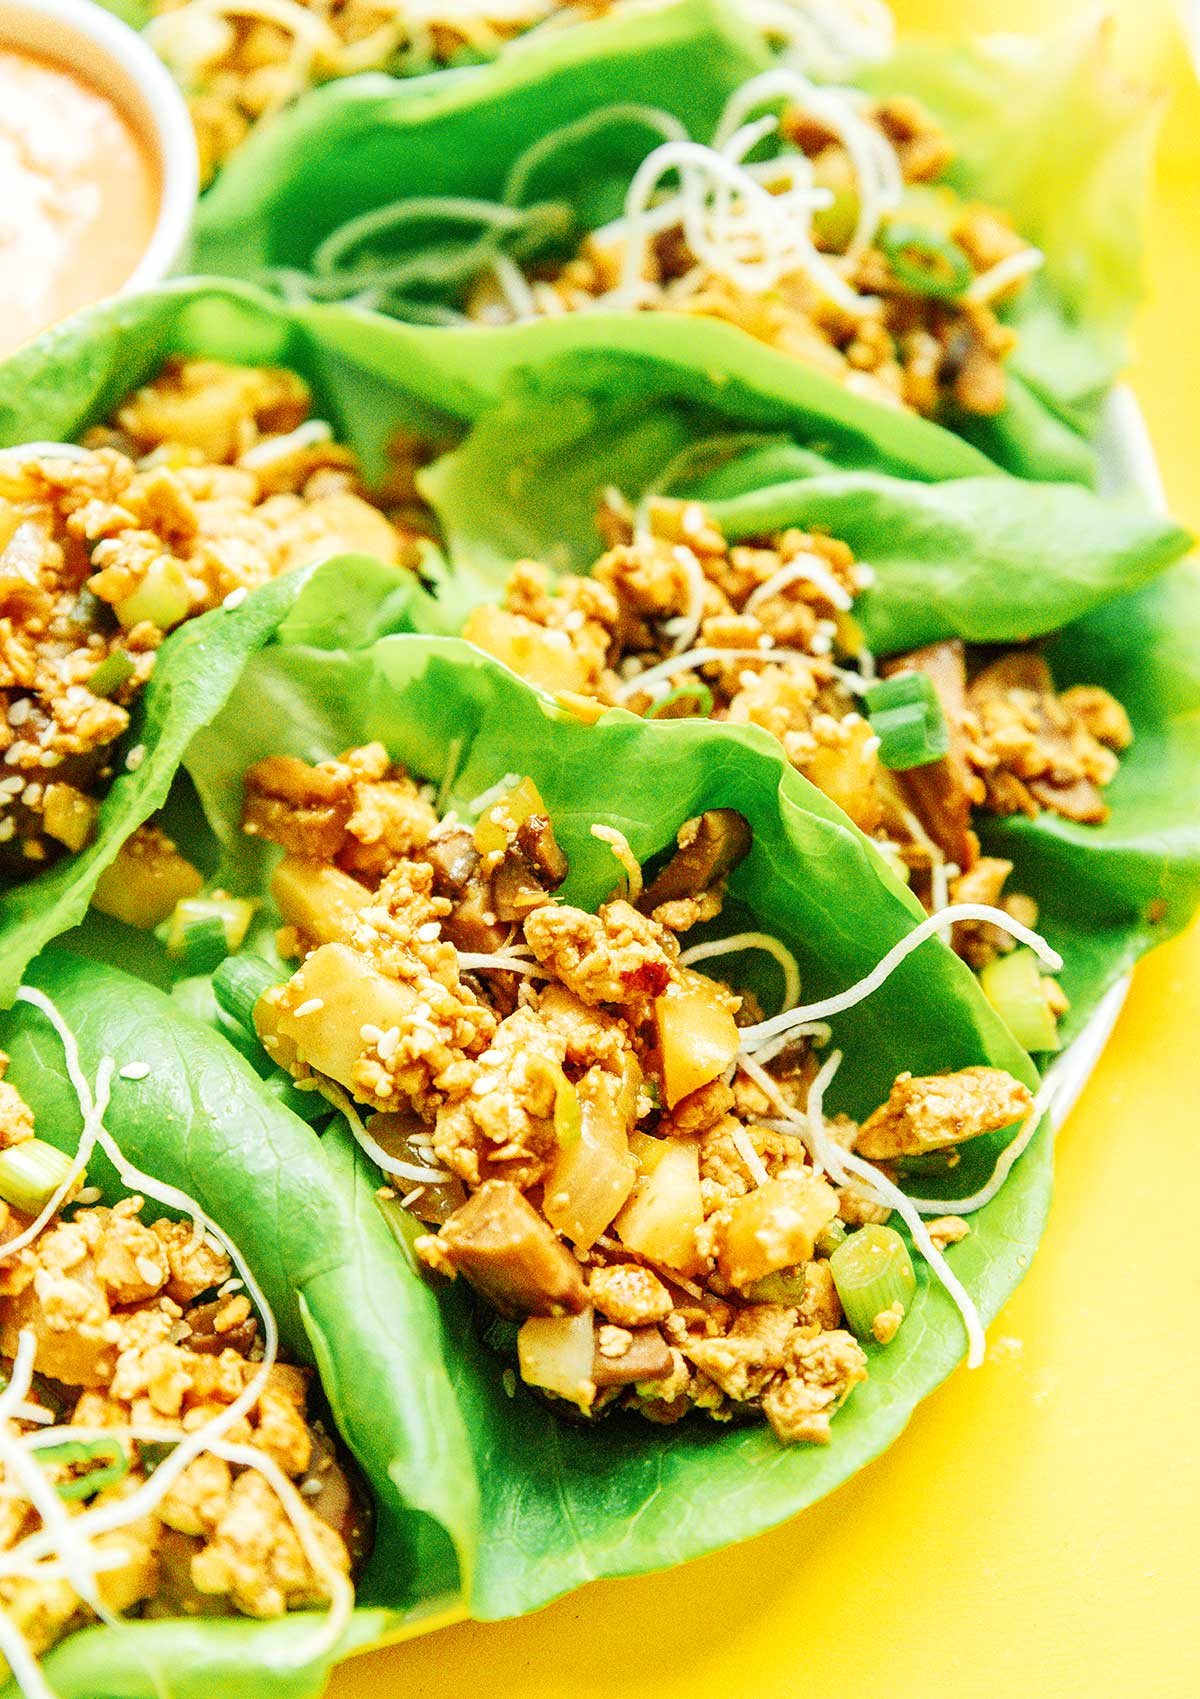 A close-up view detailing the filling in vegan lettuce wraps